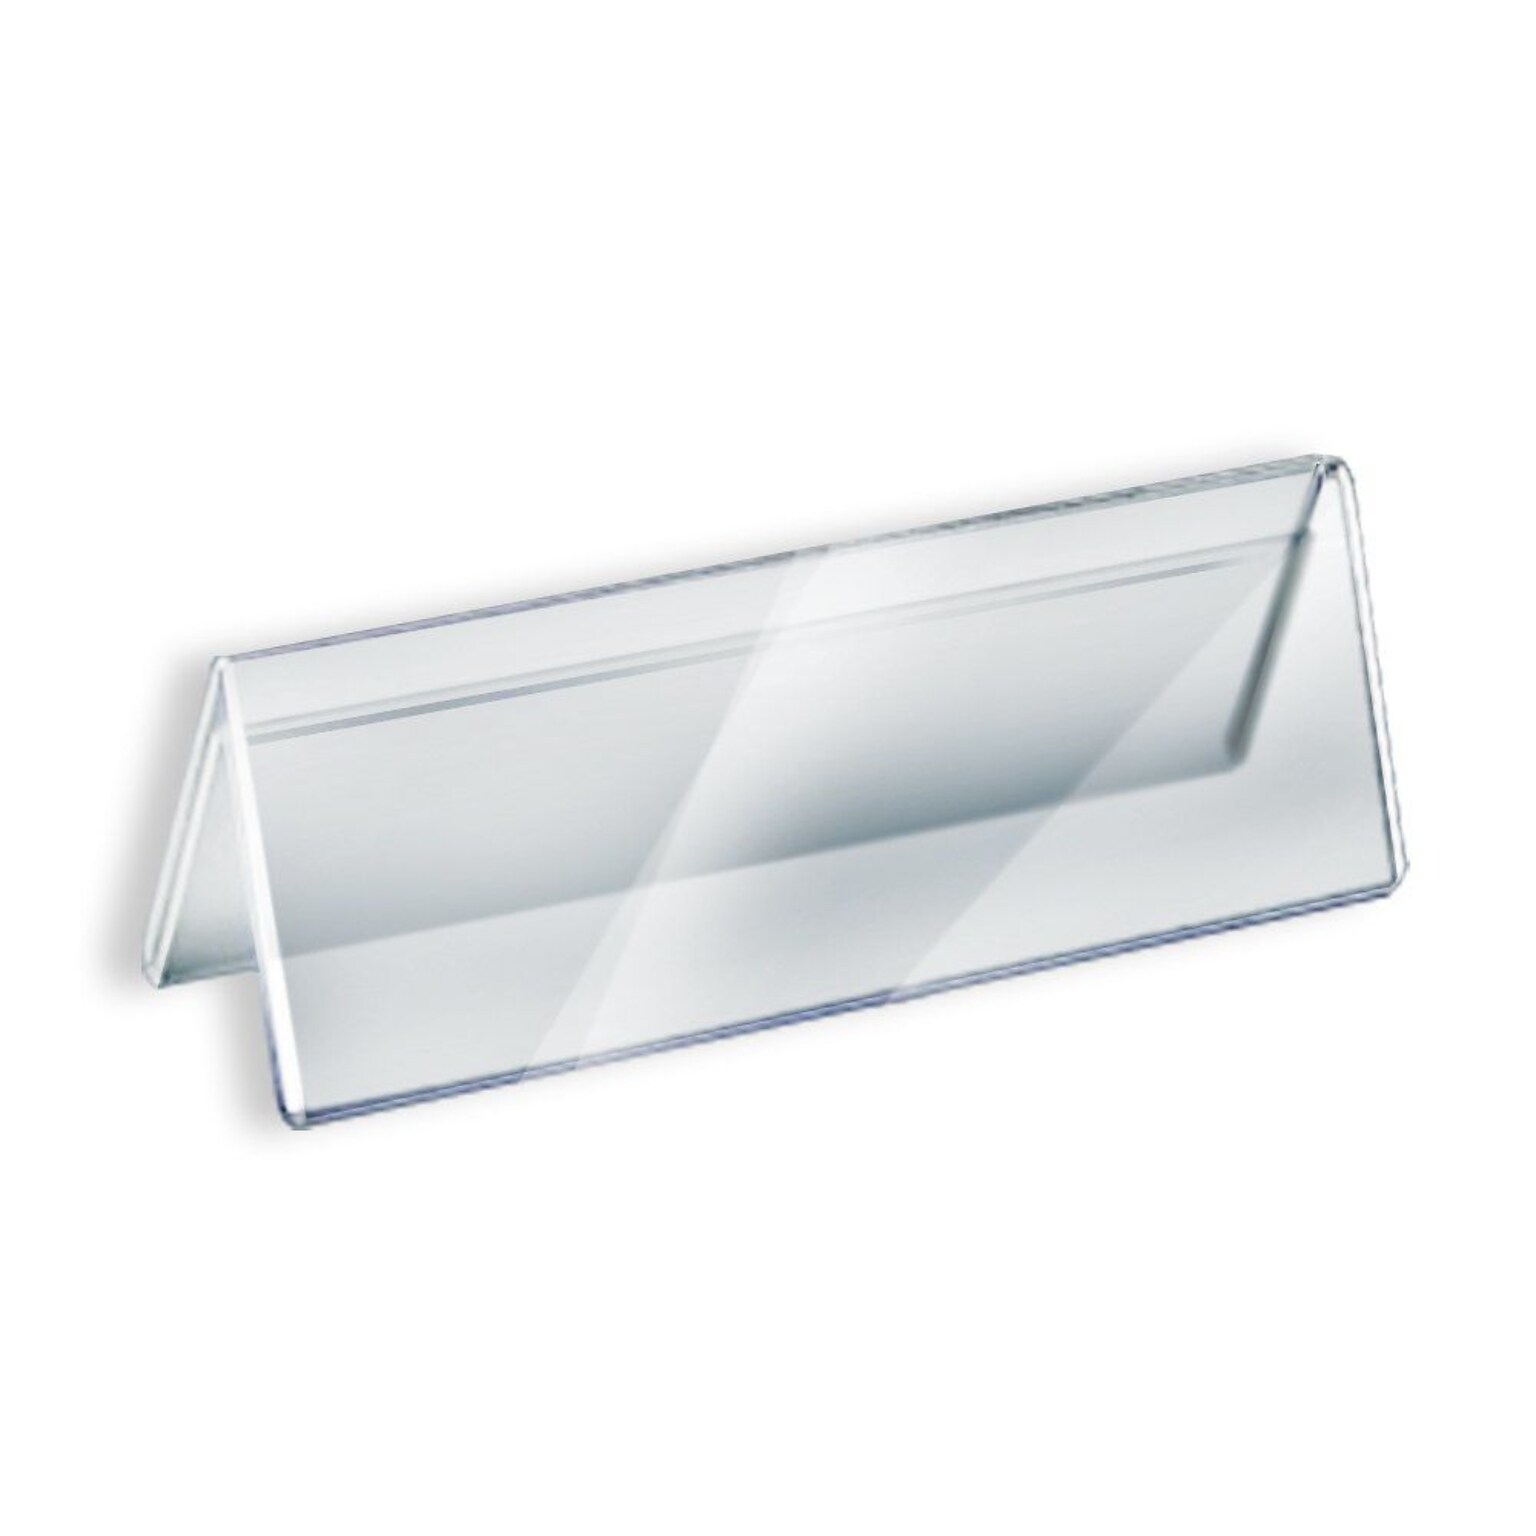 Azar Displays Two Sided Tent Style Clear Acrylic Sign Holder and Nameplate, Size: 11 W x 3 H on each side, 10-Pack (192806)